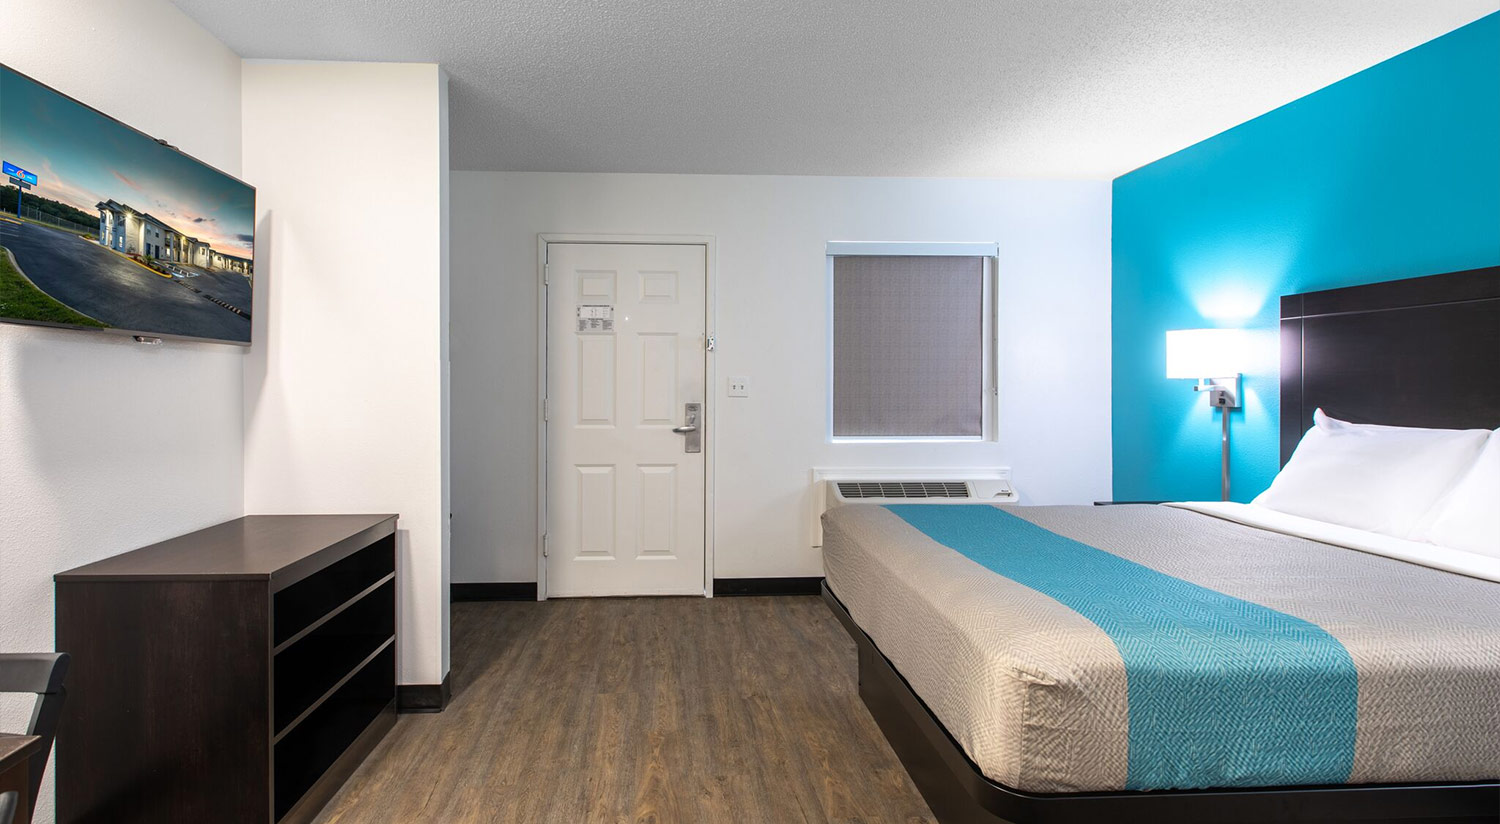 ENJOY WELL-APPOINTED AND AFFORDABLE GUEST ROOMS AWAIT YOU AT THE MOTEL 6 GREENVILLE, SC I-85 NEAR DOWNTOWN